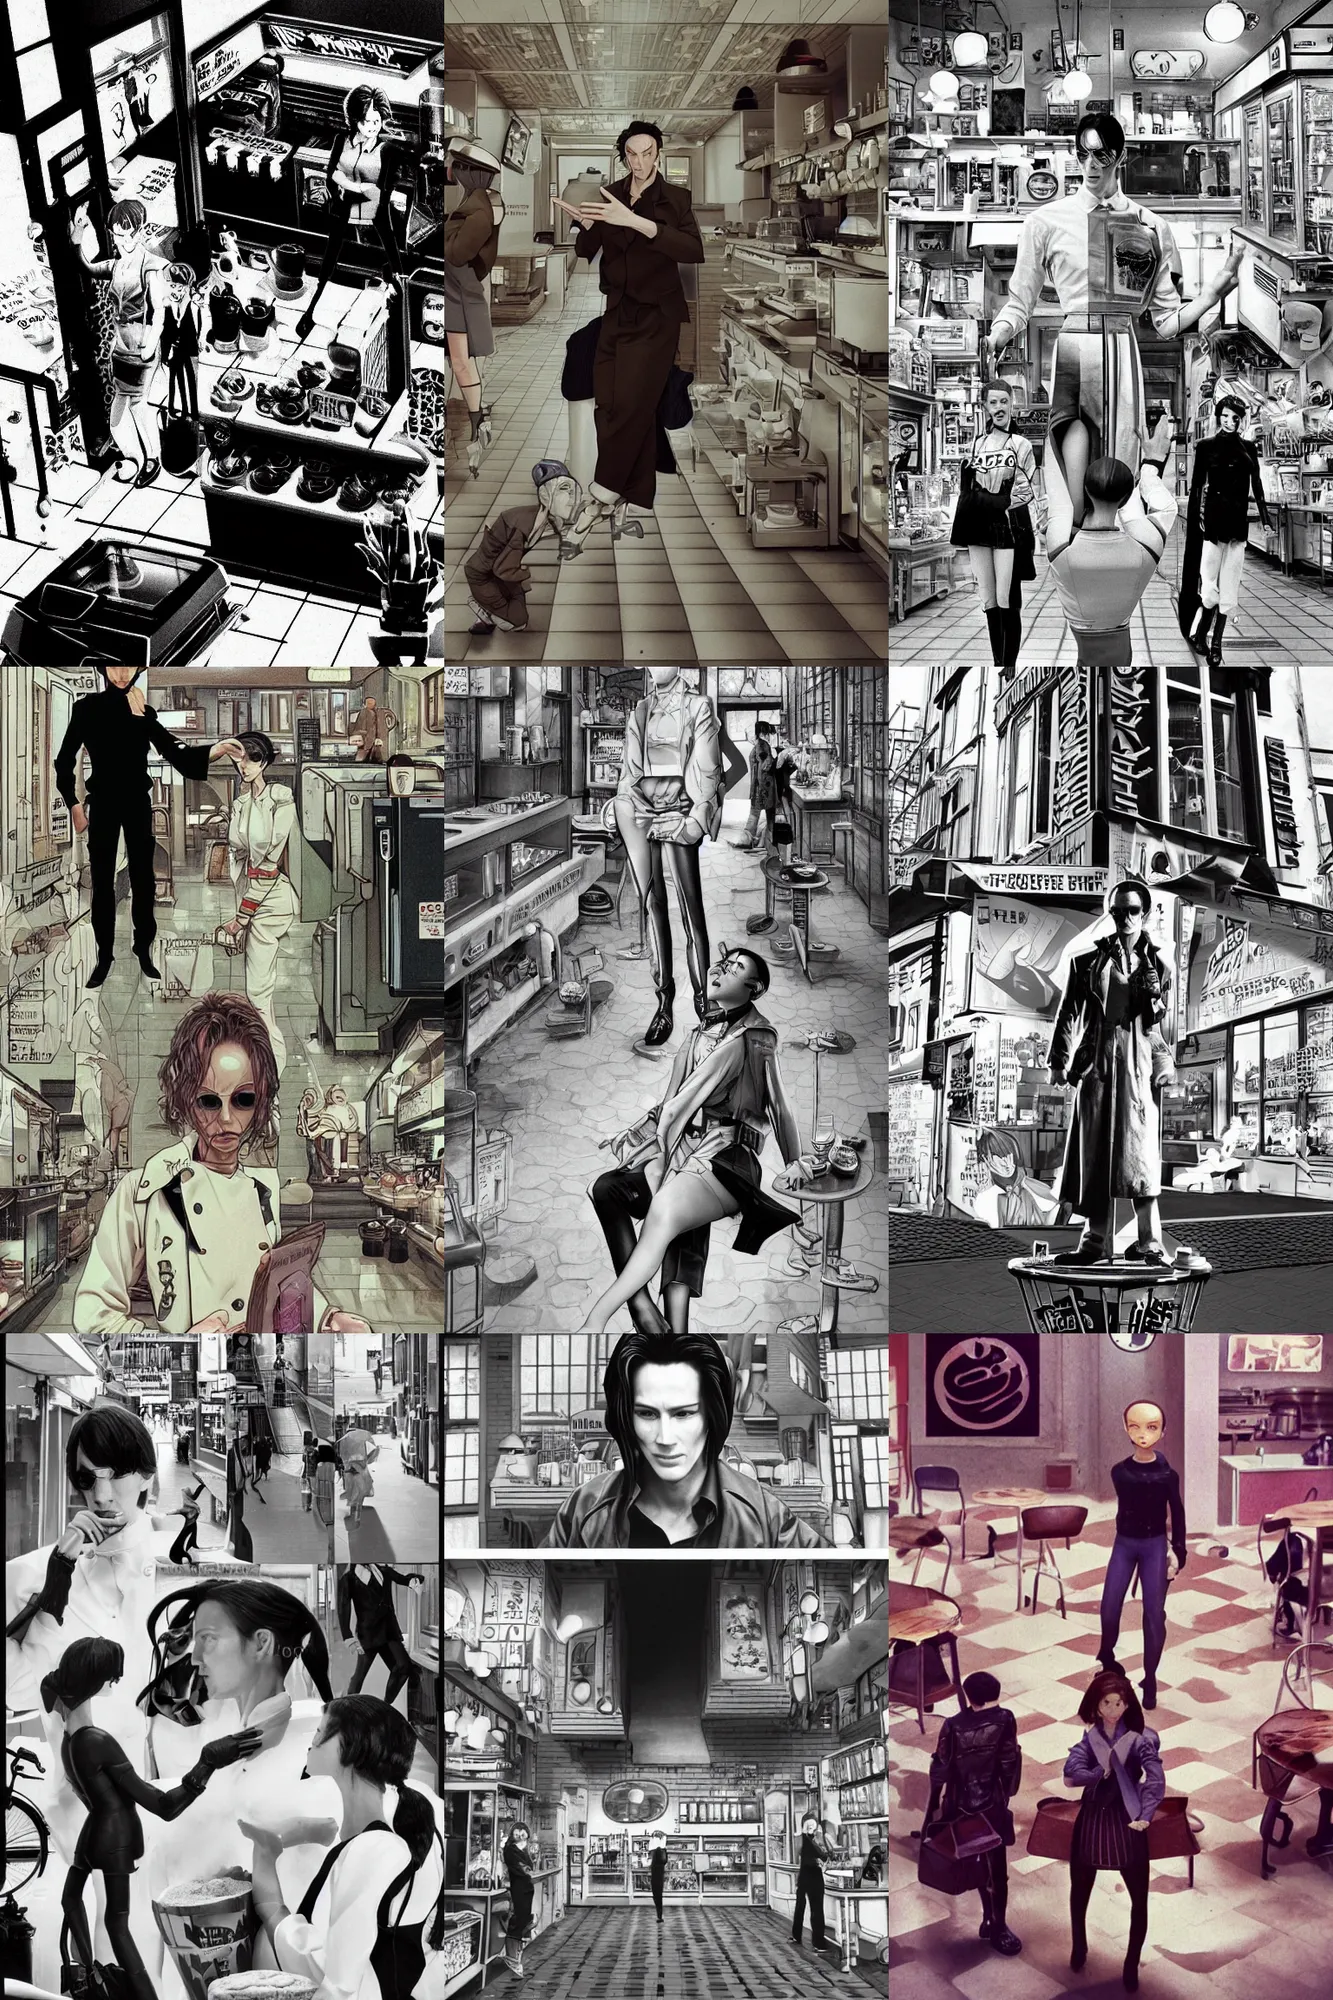 Prompt: beautiful hyperelliptic extreme three point perspective film still reimagined coffee shop scene from the matrix pastry bake off(1990) full-body portrait in style of 1990s frontiers in herbal anthropomorphic retrofuturism french seinen manga street photography fashion edition, highly detailed pointé posed sheer porcelain miuature keanu reeves as neo model, focus on pursed lips, chocolate drowning, strawberry accident, terrified, eye contact, tilt shift ghibli style scene background, soft lighting